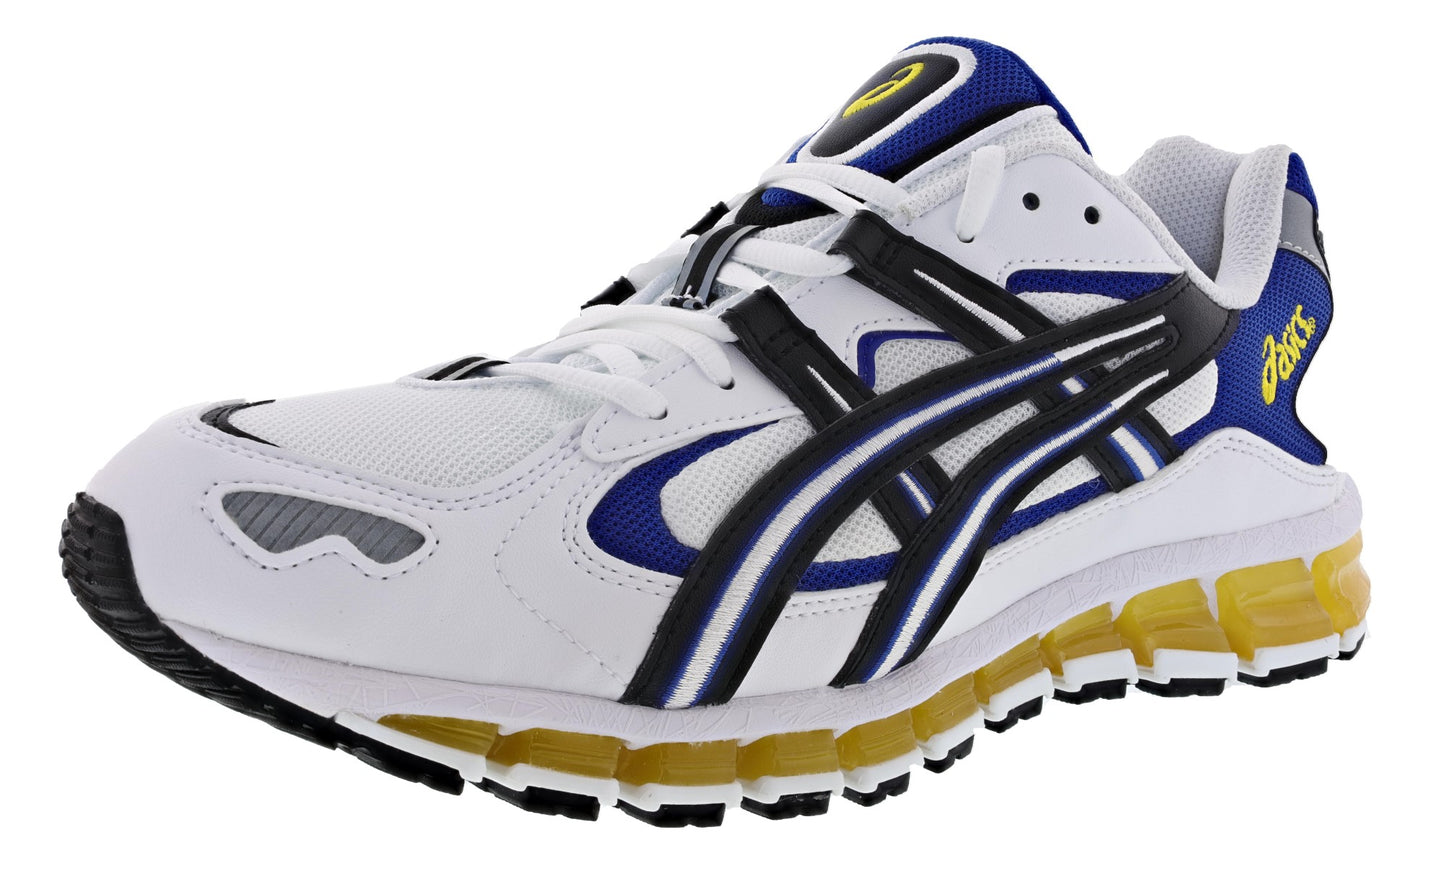 Lateral of White with Black and Blue accents ASICS Men's Cushioned Running Shoes Gel Kayano 5 360